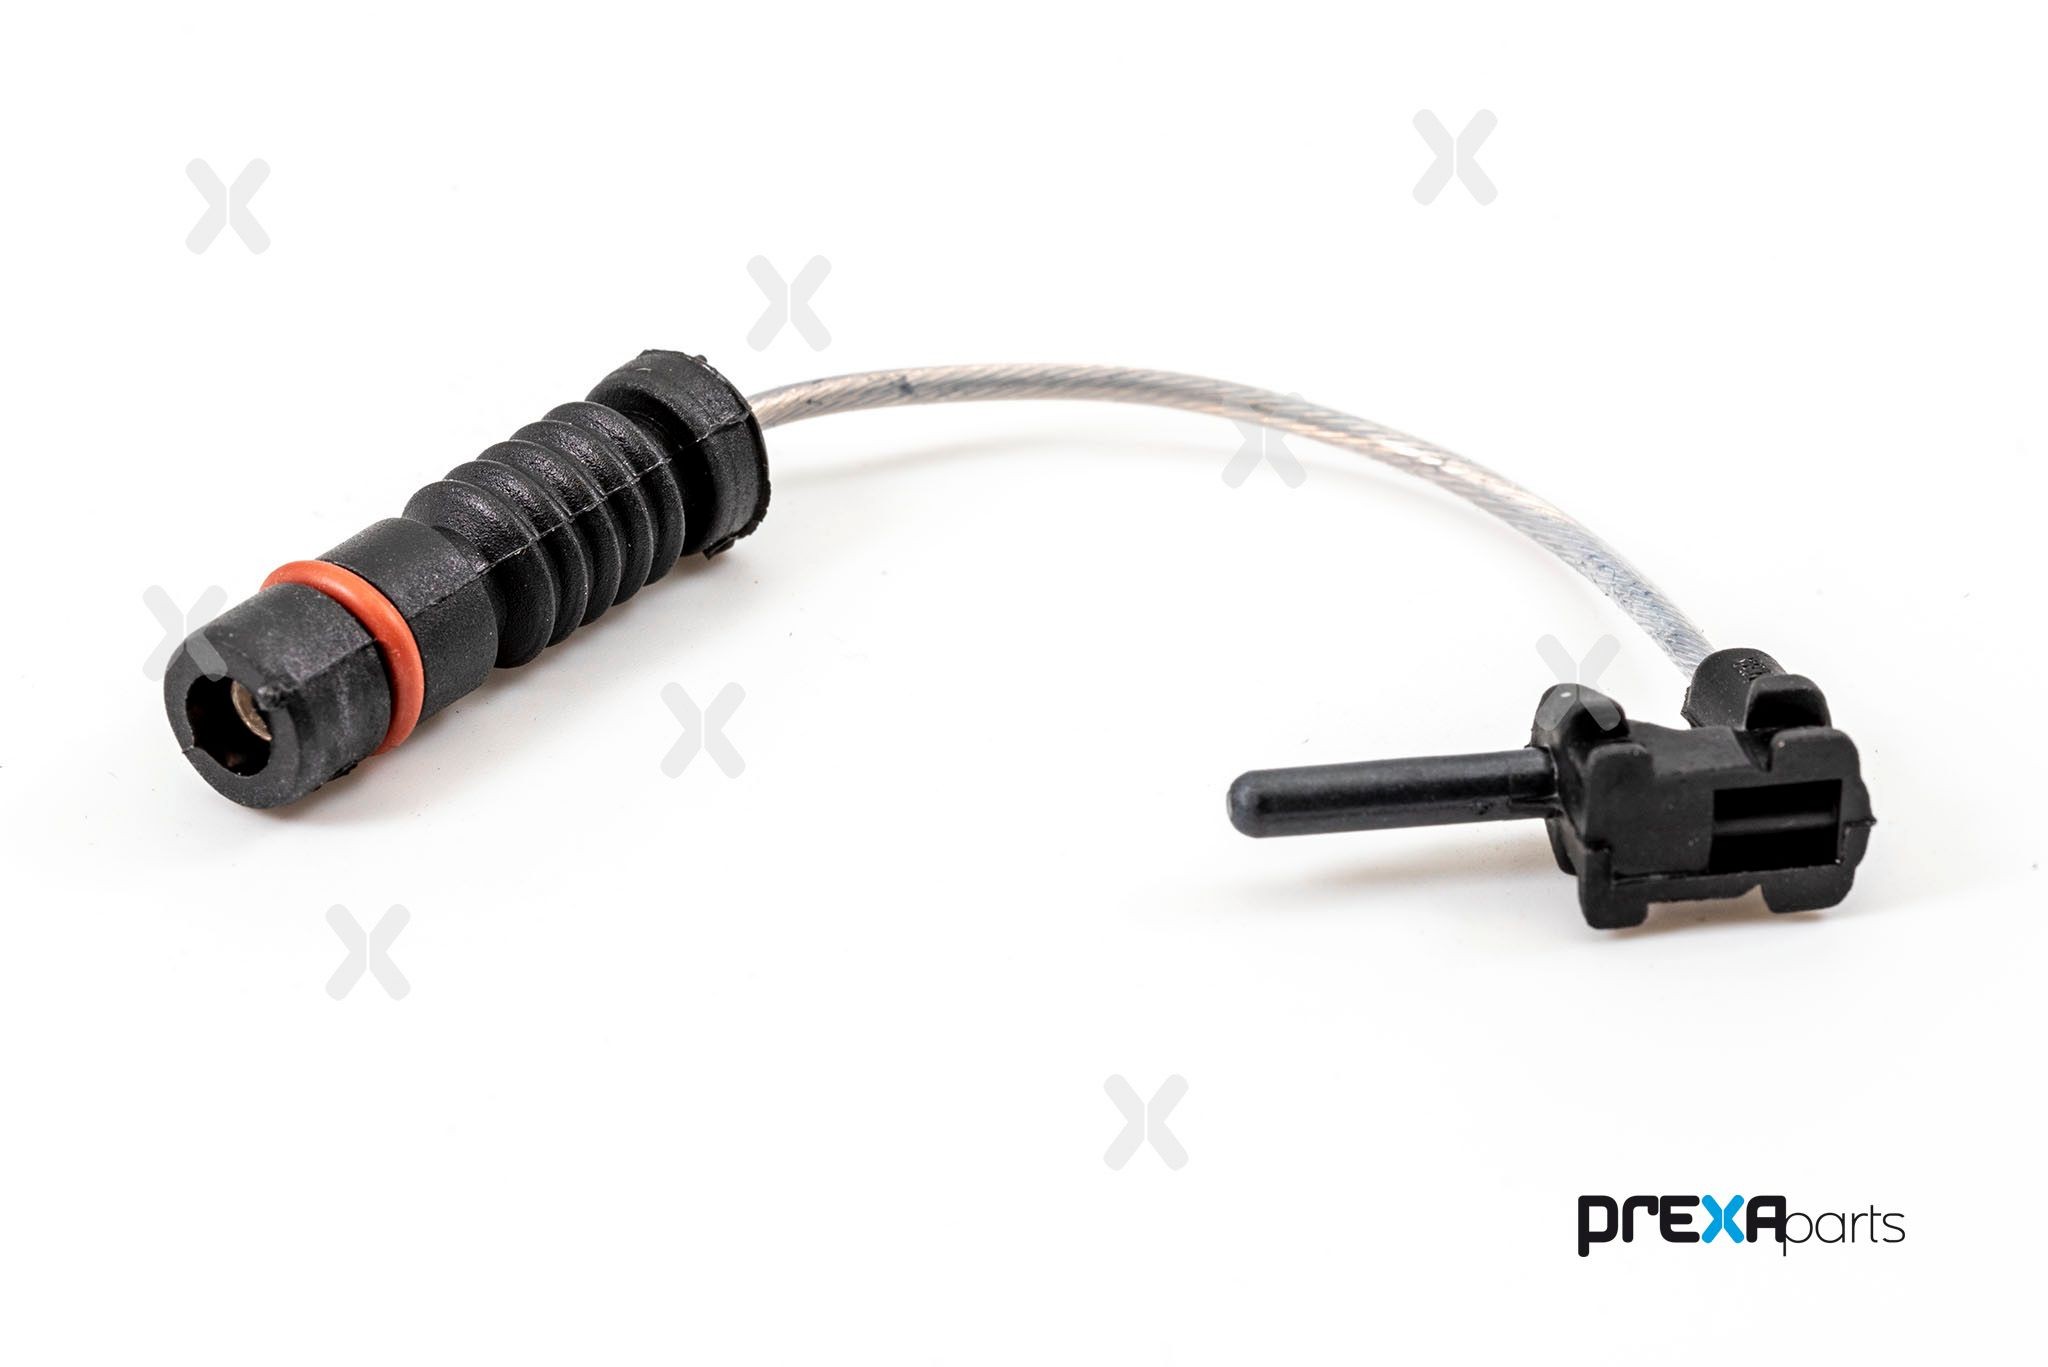 PREXAparts Brake wear sensor rear and front MERCEDES-BENZ T1 Platform/Chassis (601) new P303028